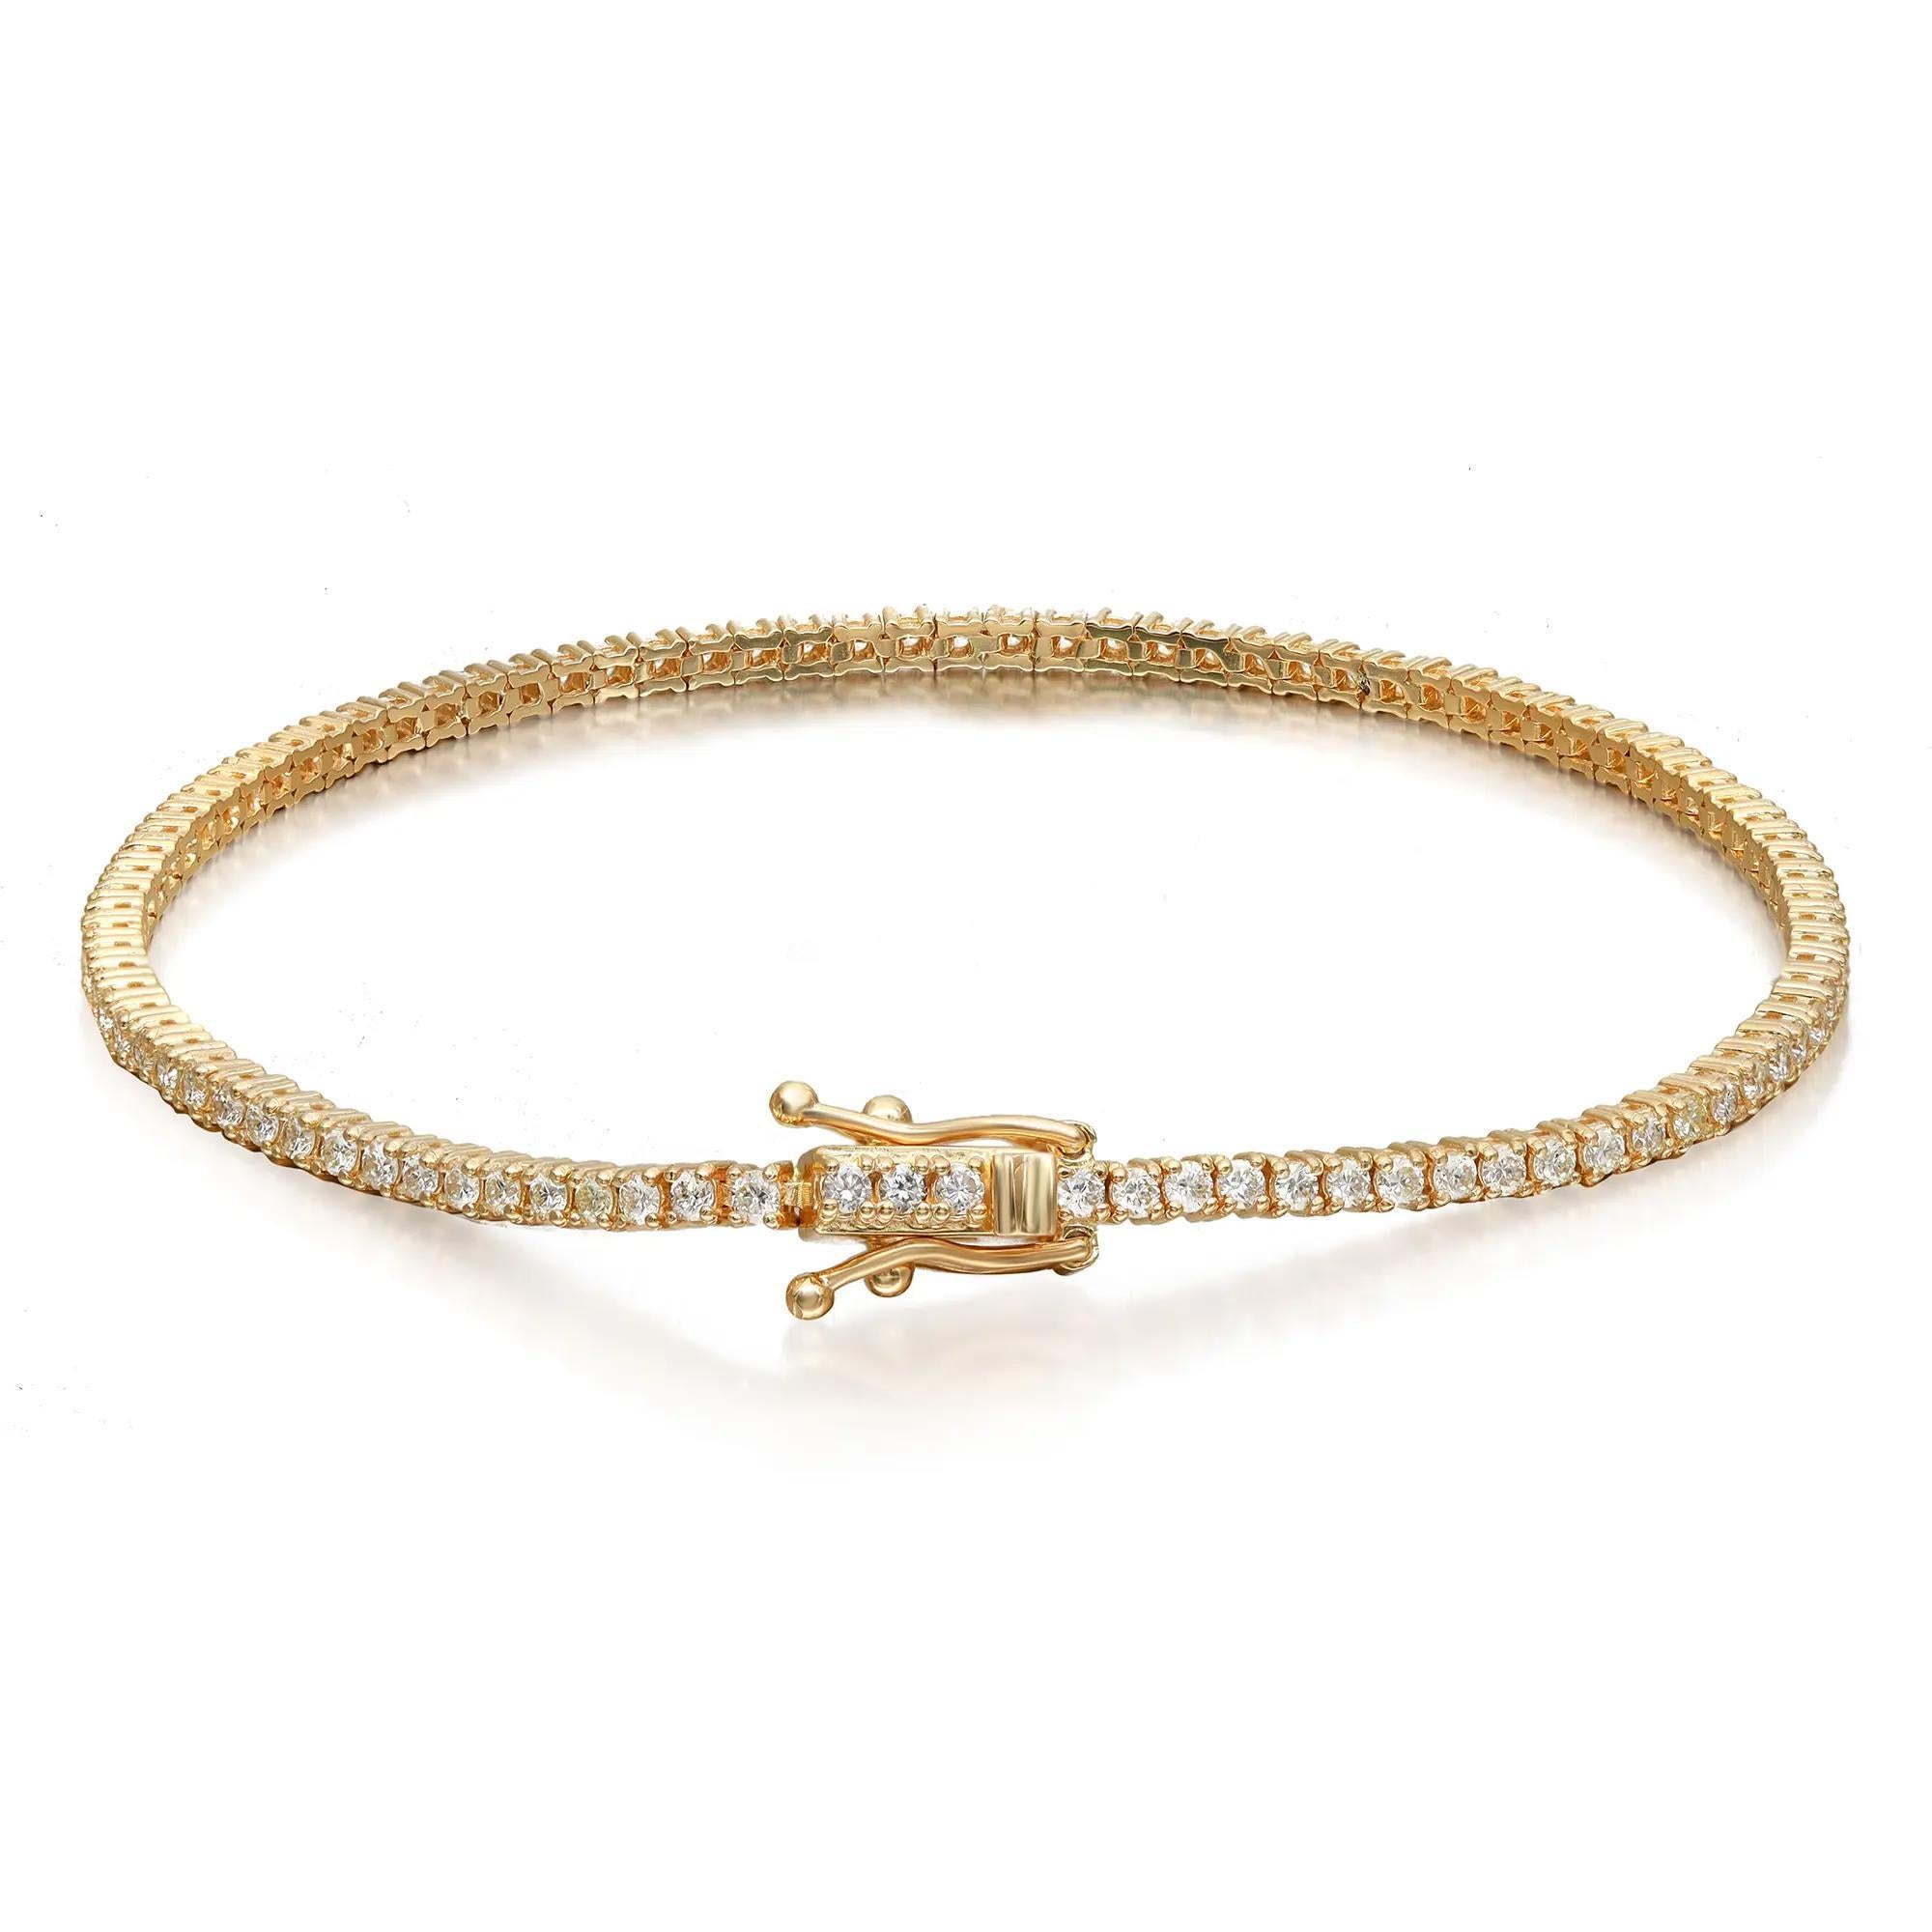 This beautifully crafted Rachel Koen tennis bracelet features prong set round brilliant cut diamonds studded in lustrous 14K yellow gold. Total white diamond weight: 0.95 carat. Diamond Quality: G-H color and VS-SI clarity. Bracelet length: 7